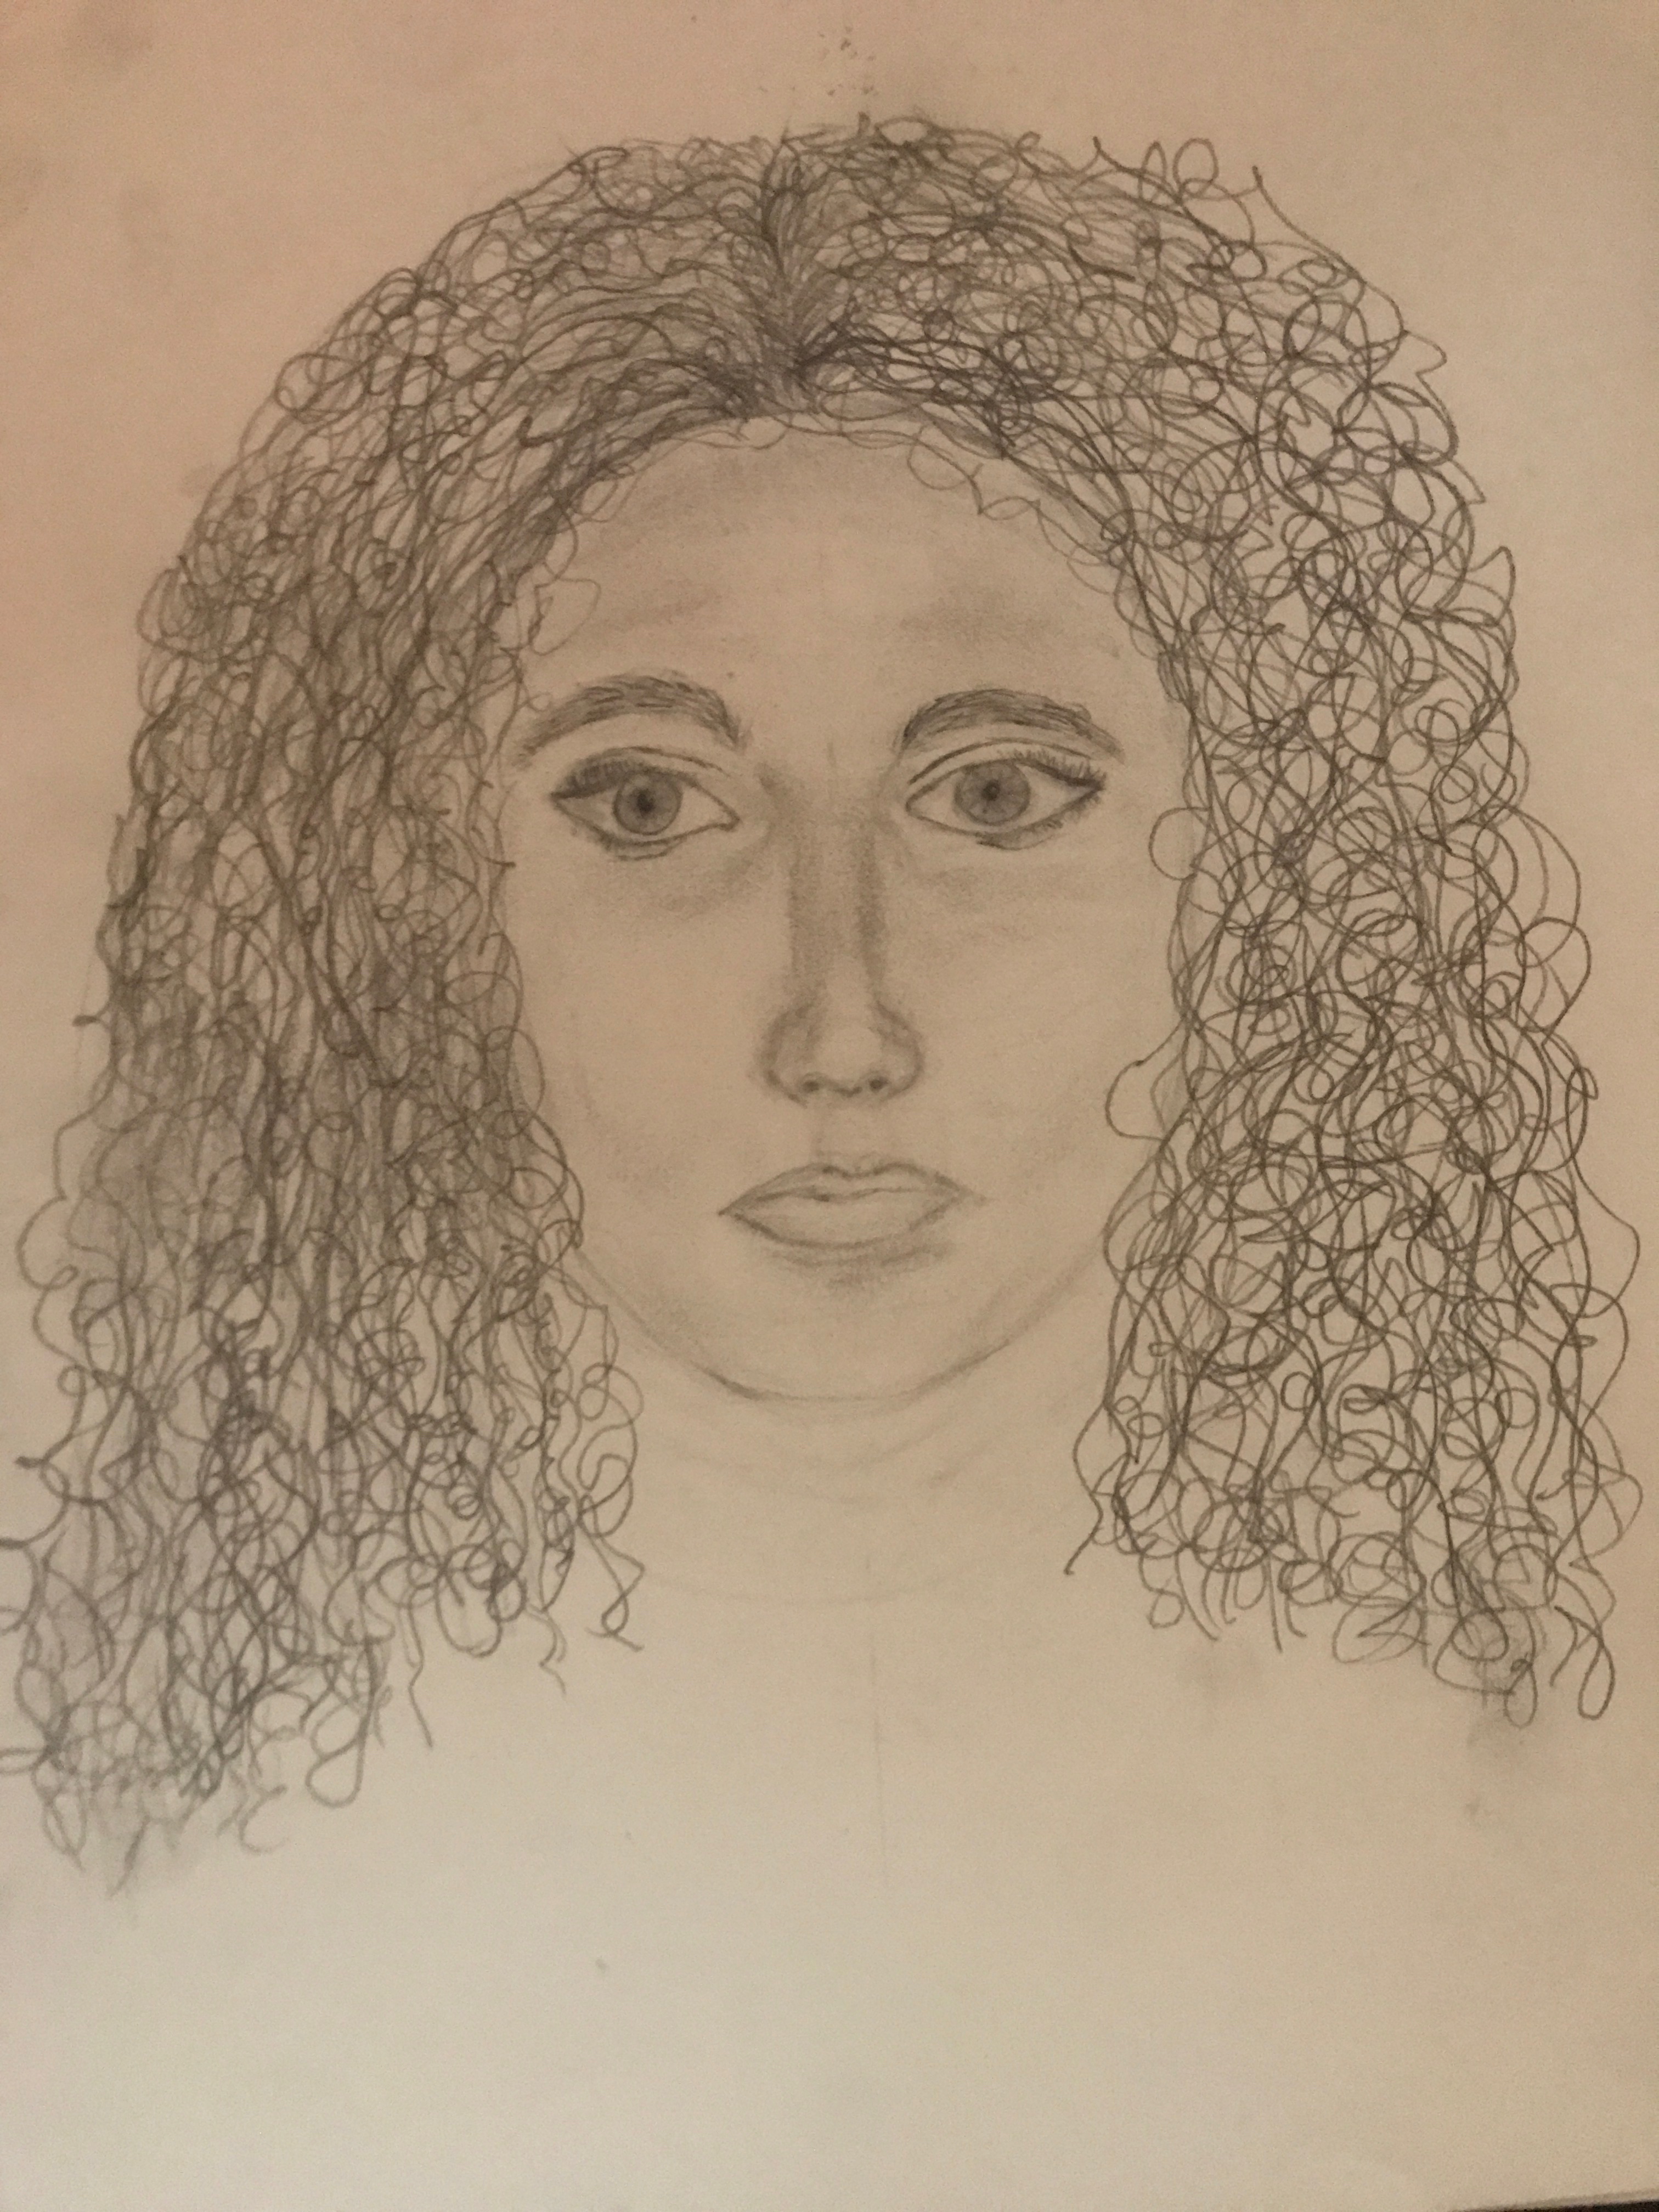 Artwork of a young girl with curly hair